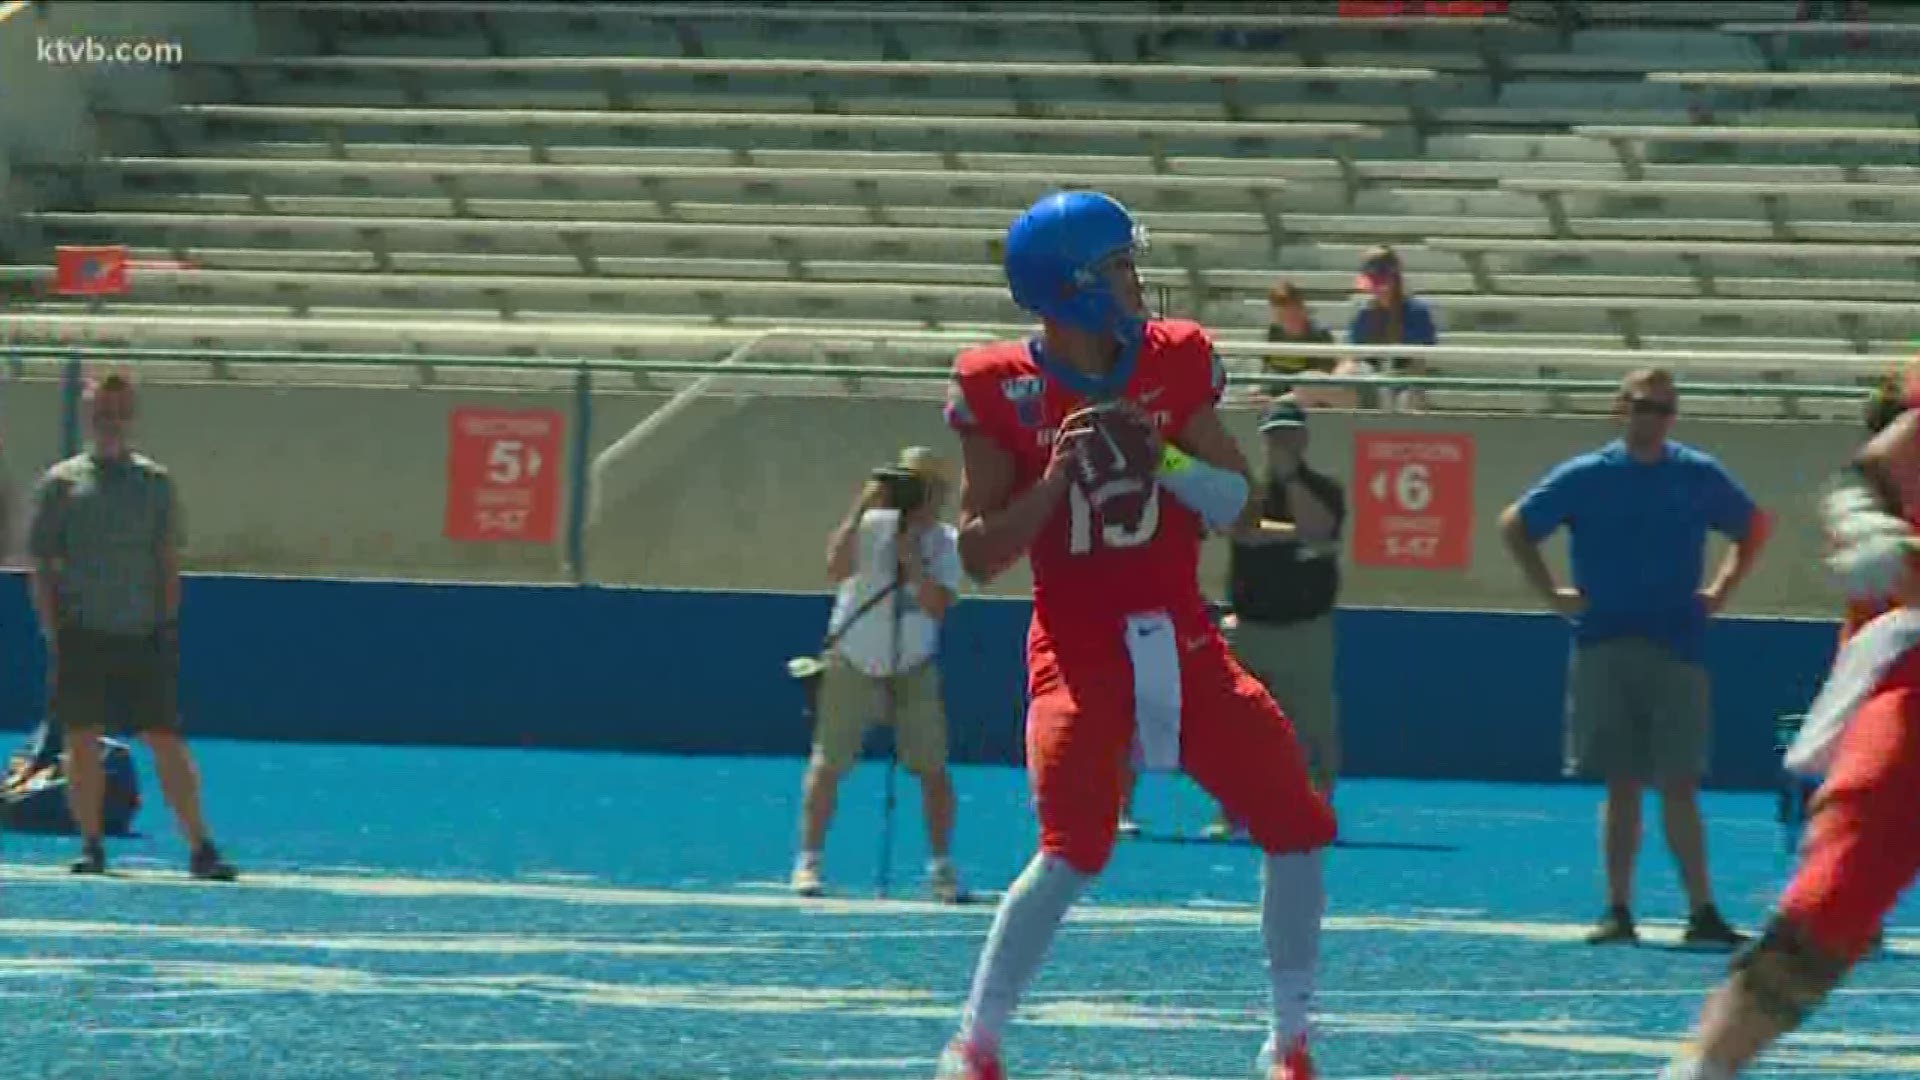 Following the Boise State Broncos' Fall Fan Fest on Saturday, Head Coach Bryan Harsin named the next starting quarterback for the Broncos - true freshman Hank Bachmeier. This is the second time under Harsin's tenure as head coach that a freshman was named the starting quarterback.